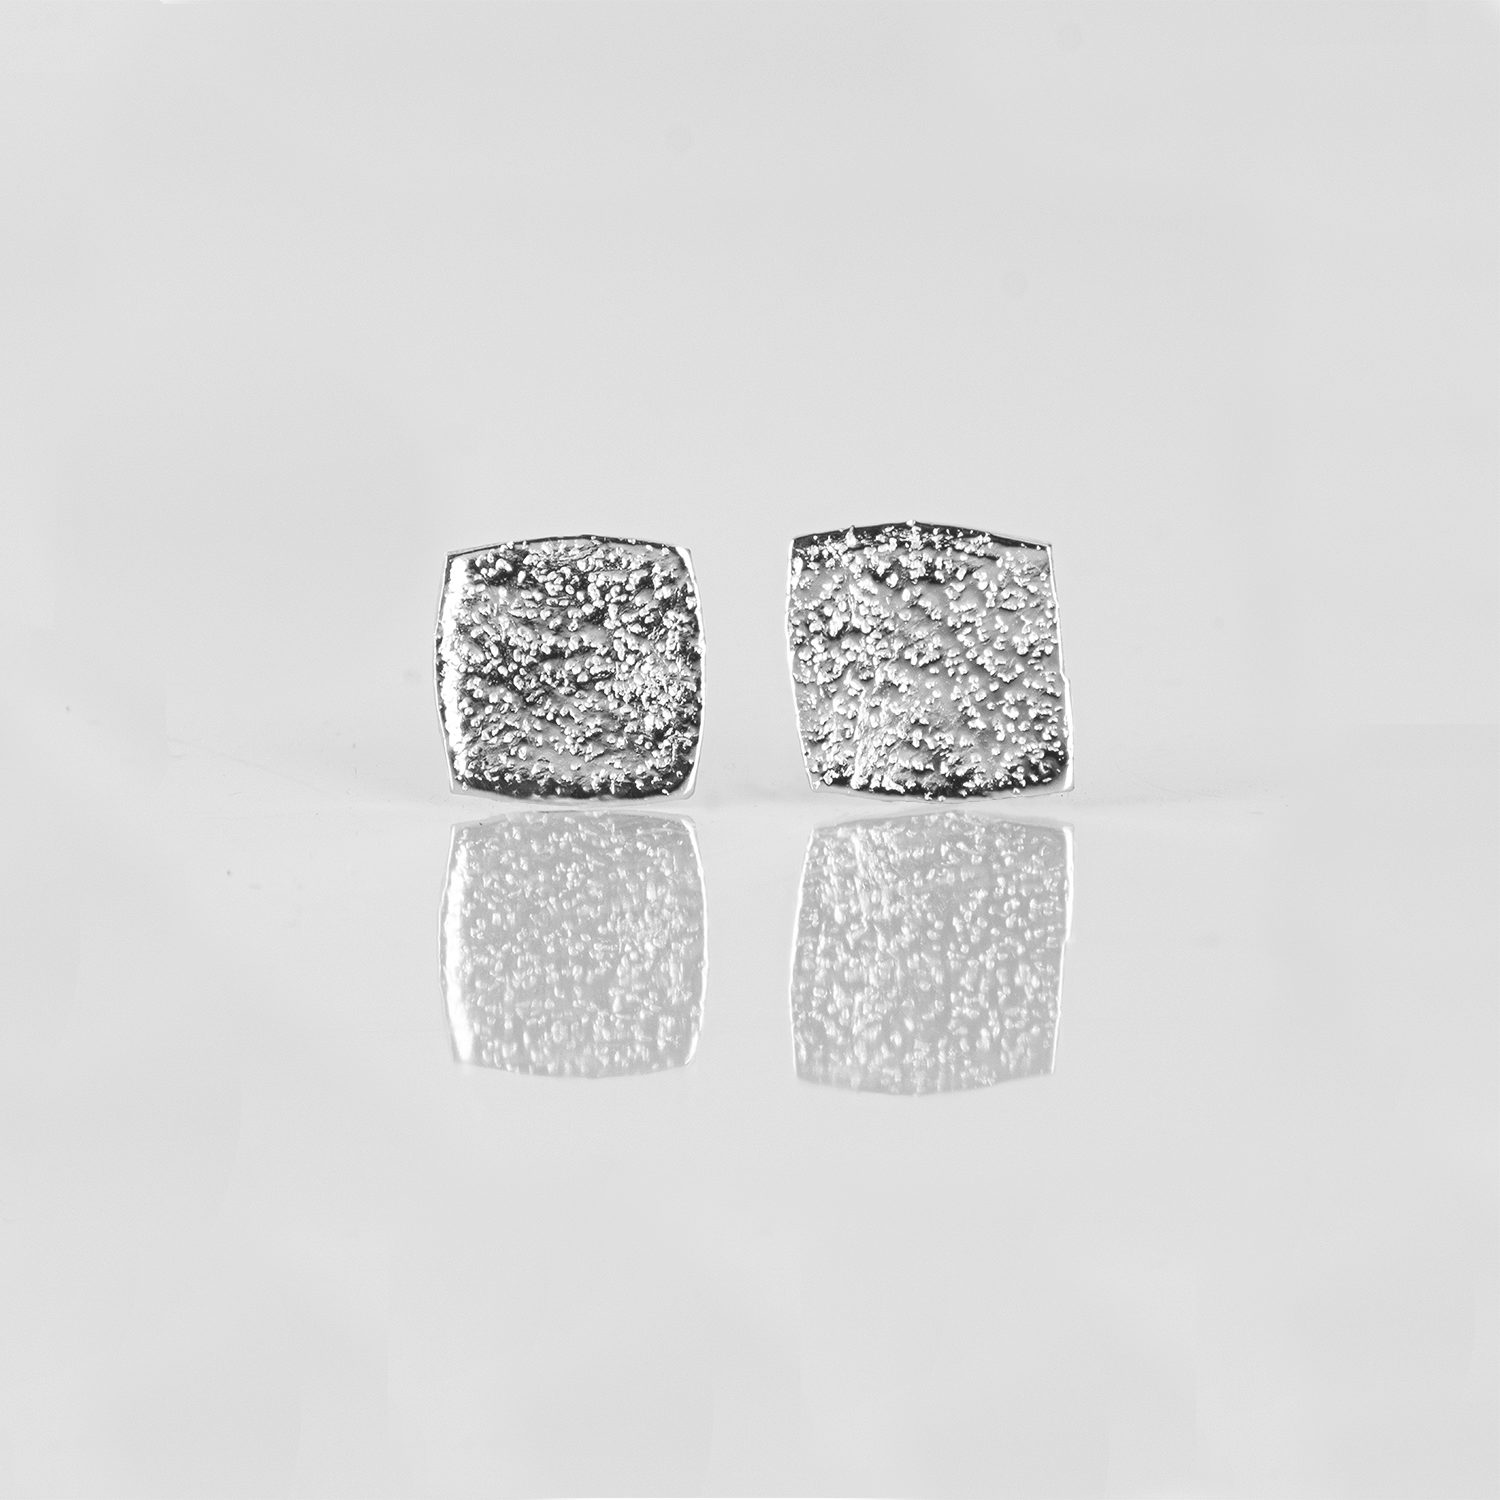 NO LEFT SQUARE, EARRINGS, SILVER, LOW